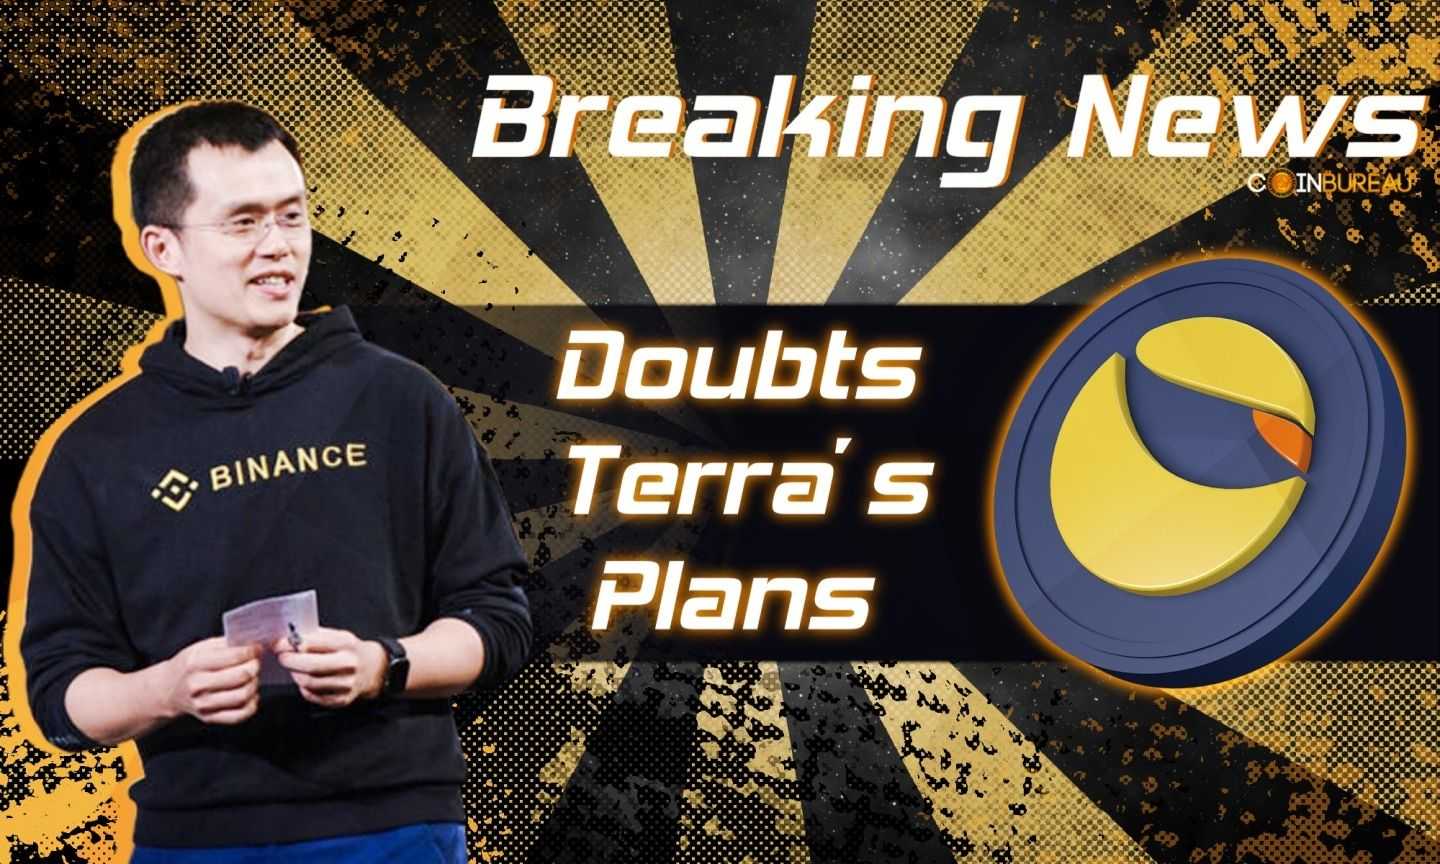 Binance CEO Changpeng Zhao Doubts Terra’s Plans for a Fork